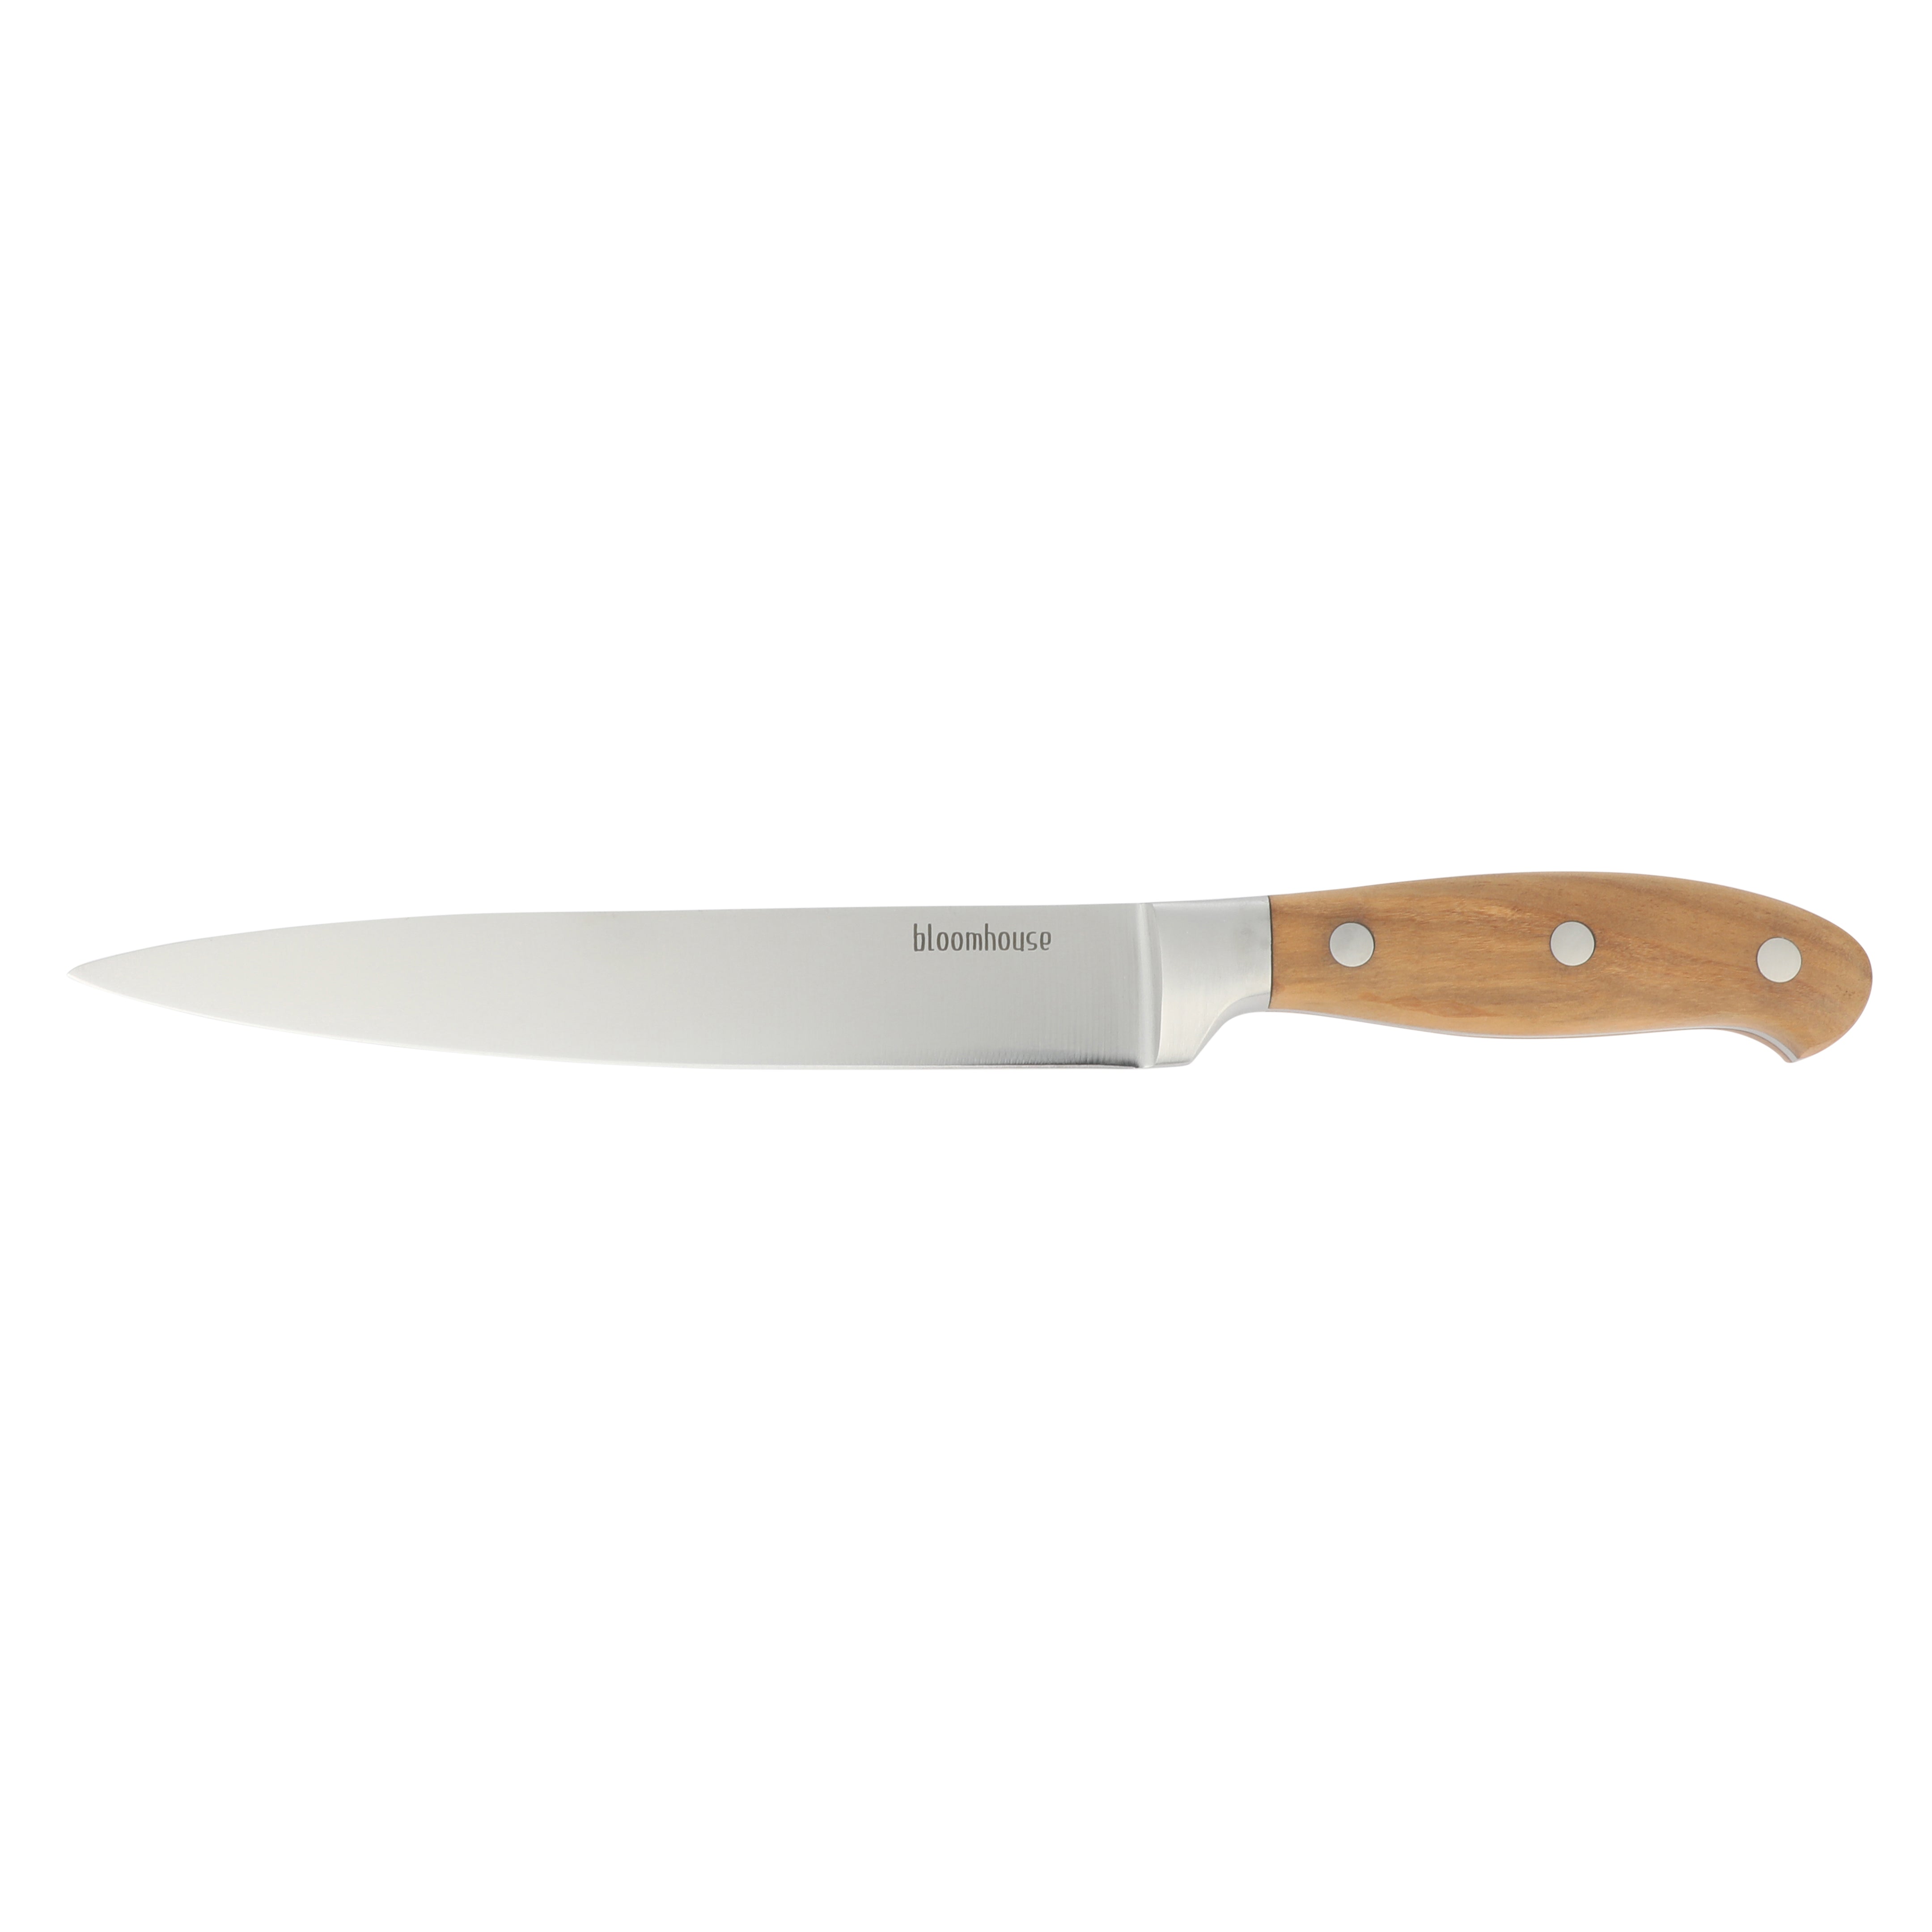 Bloomhouse 8 Inch German Steel Slicer Knife w/ Olive Wood Forged Handle